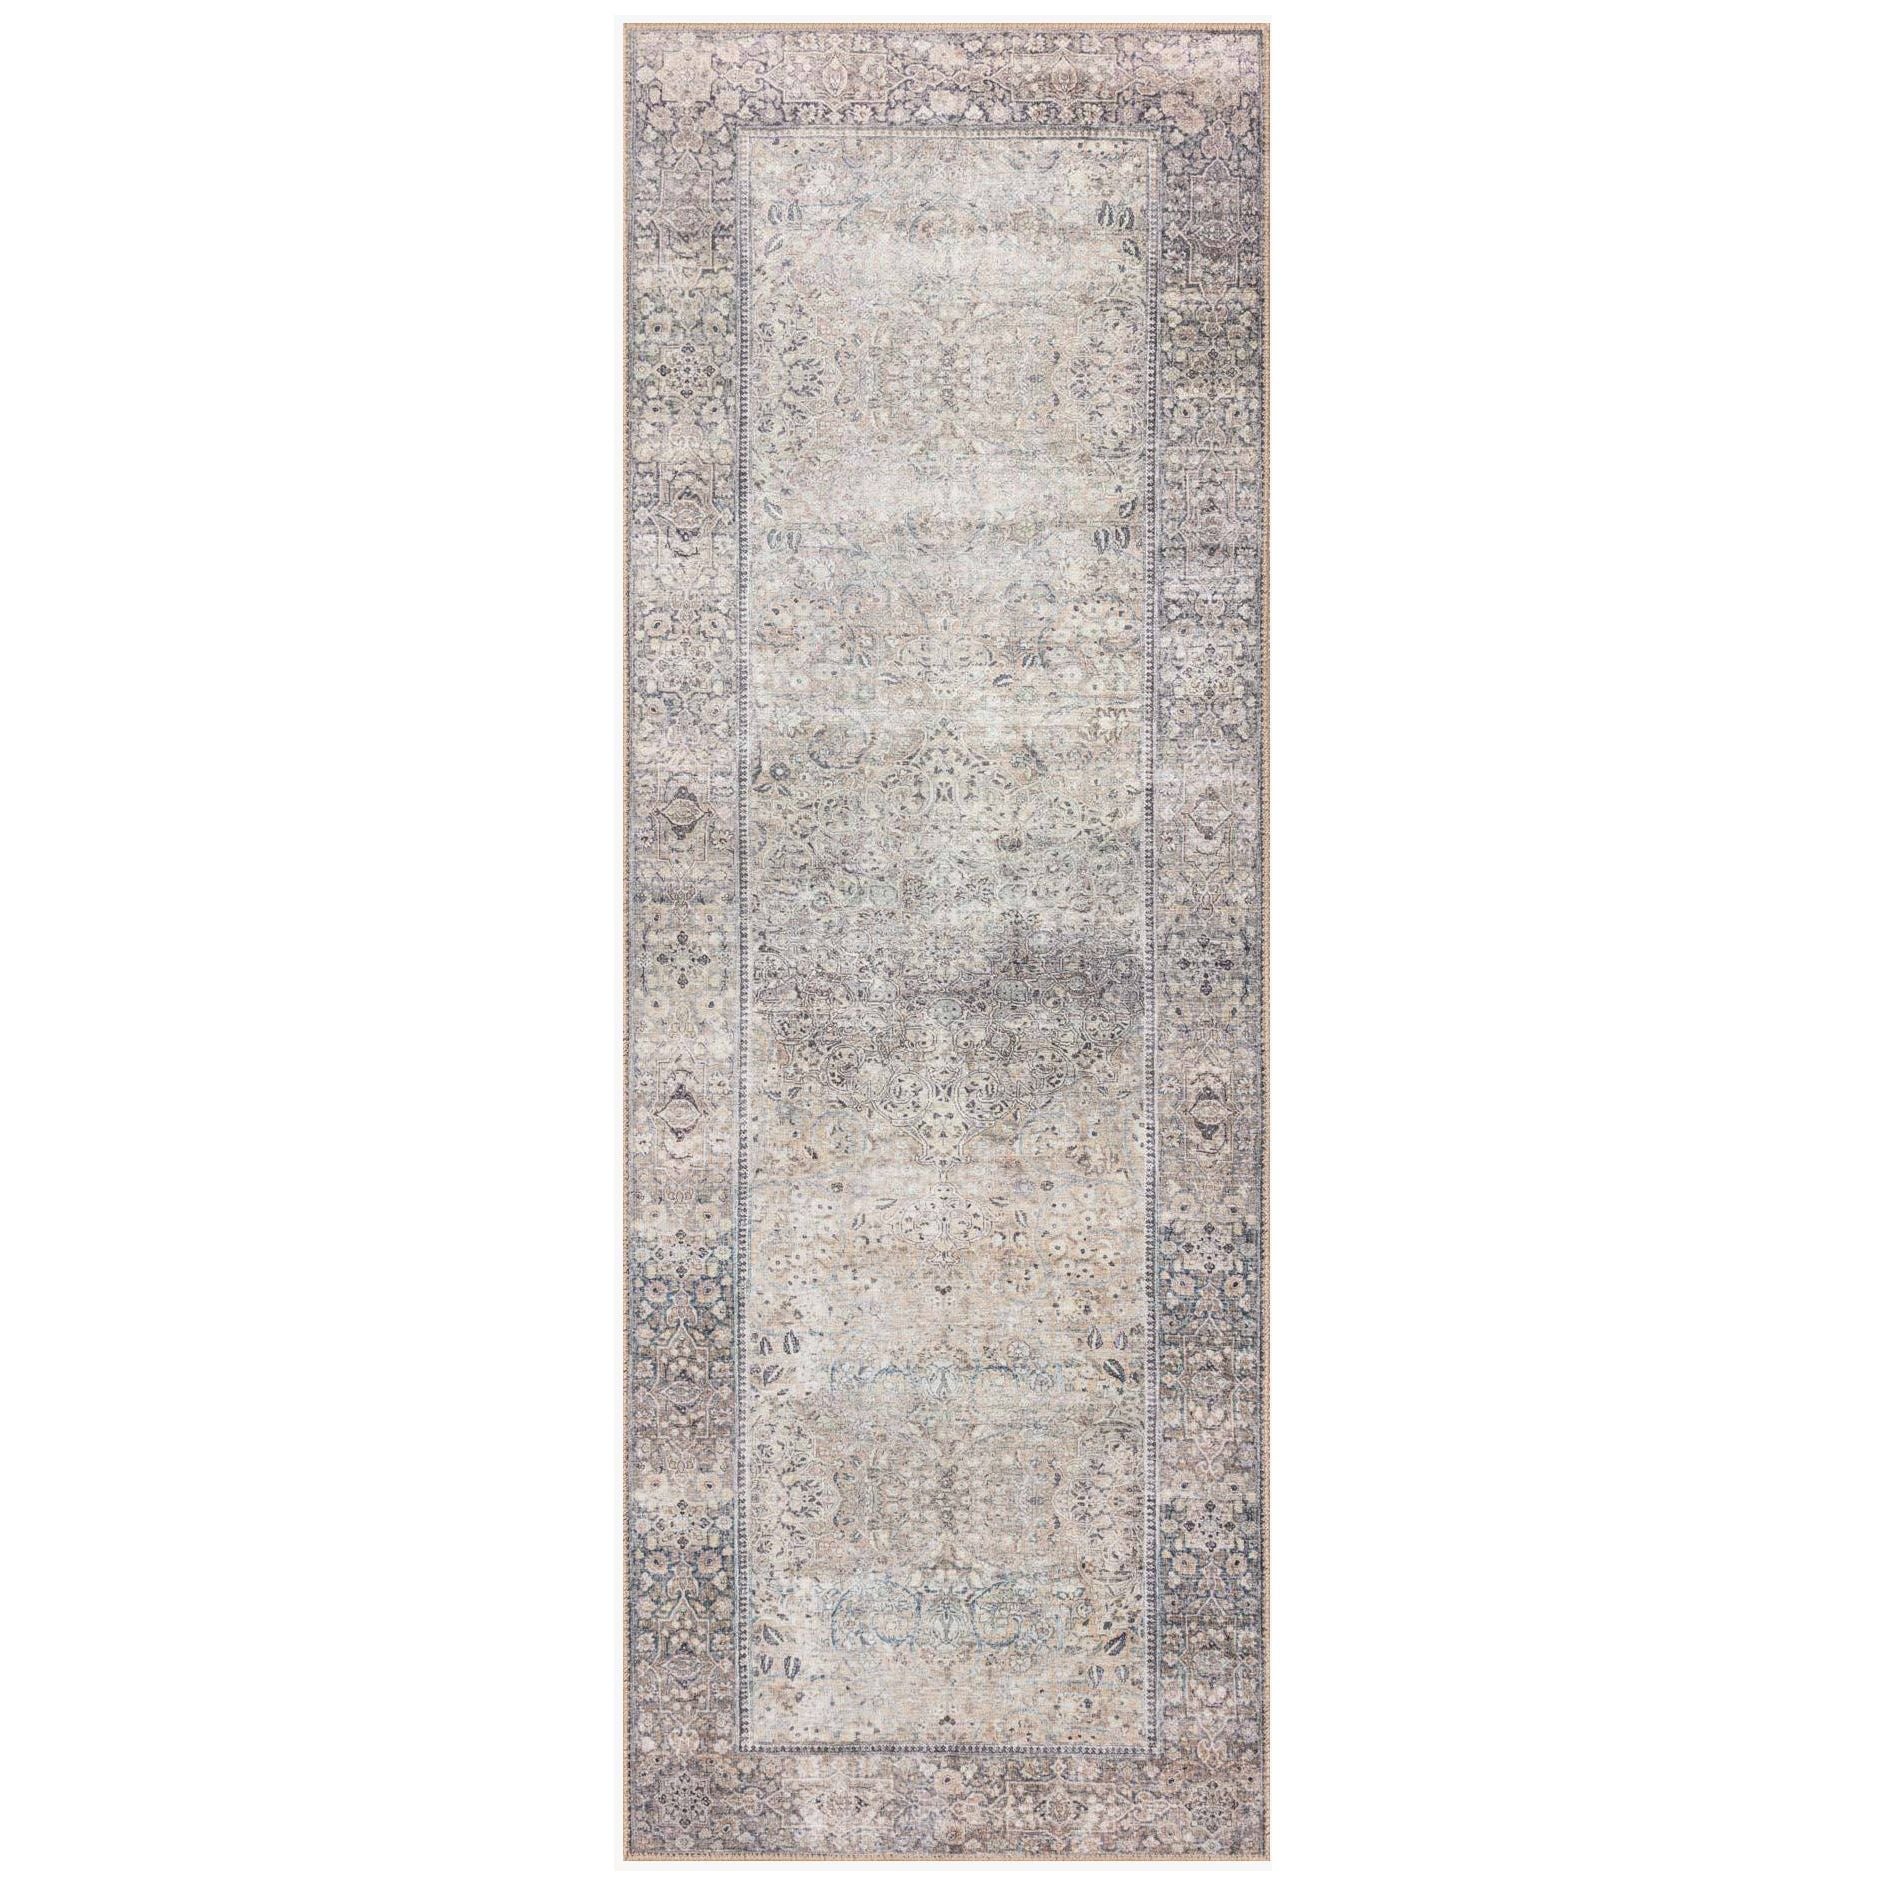 The Wynter Silver / Charcoal area rug showcases a one-of-a-kind vintage or antique area rug look power-loomed of 100% polyester. This rug brings in tones of silver, gray, blue, tan, and hints of green. The rug is ideal for high traffic areas such as living rooms, dining rooms, kitchens, hallway, and entryways.